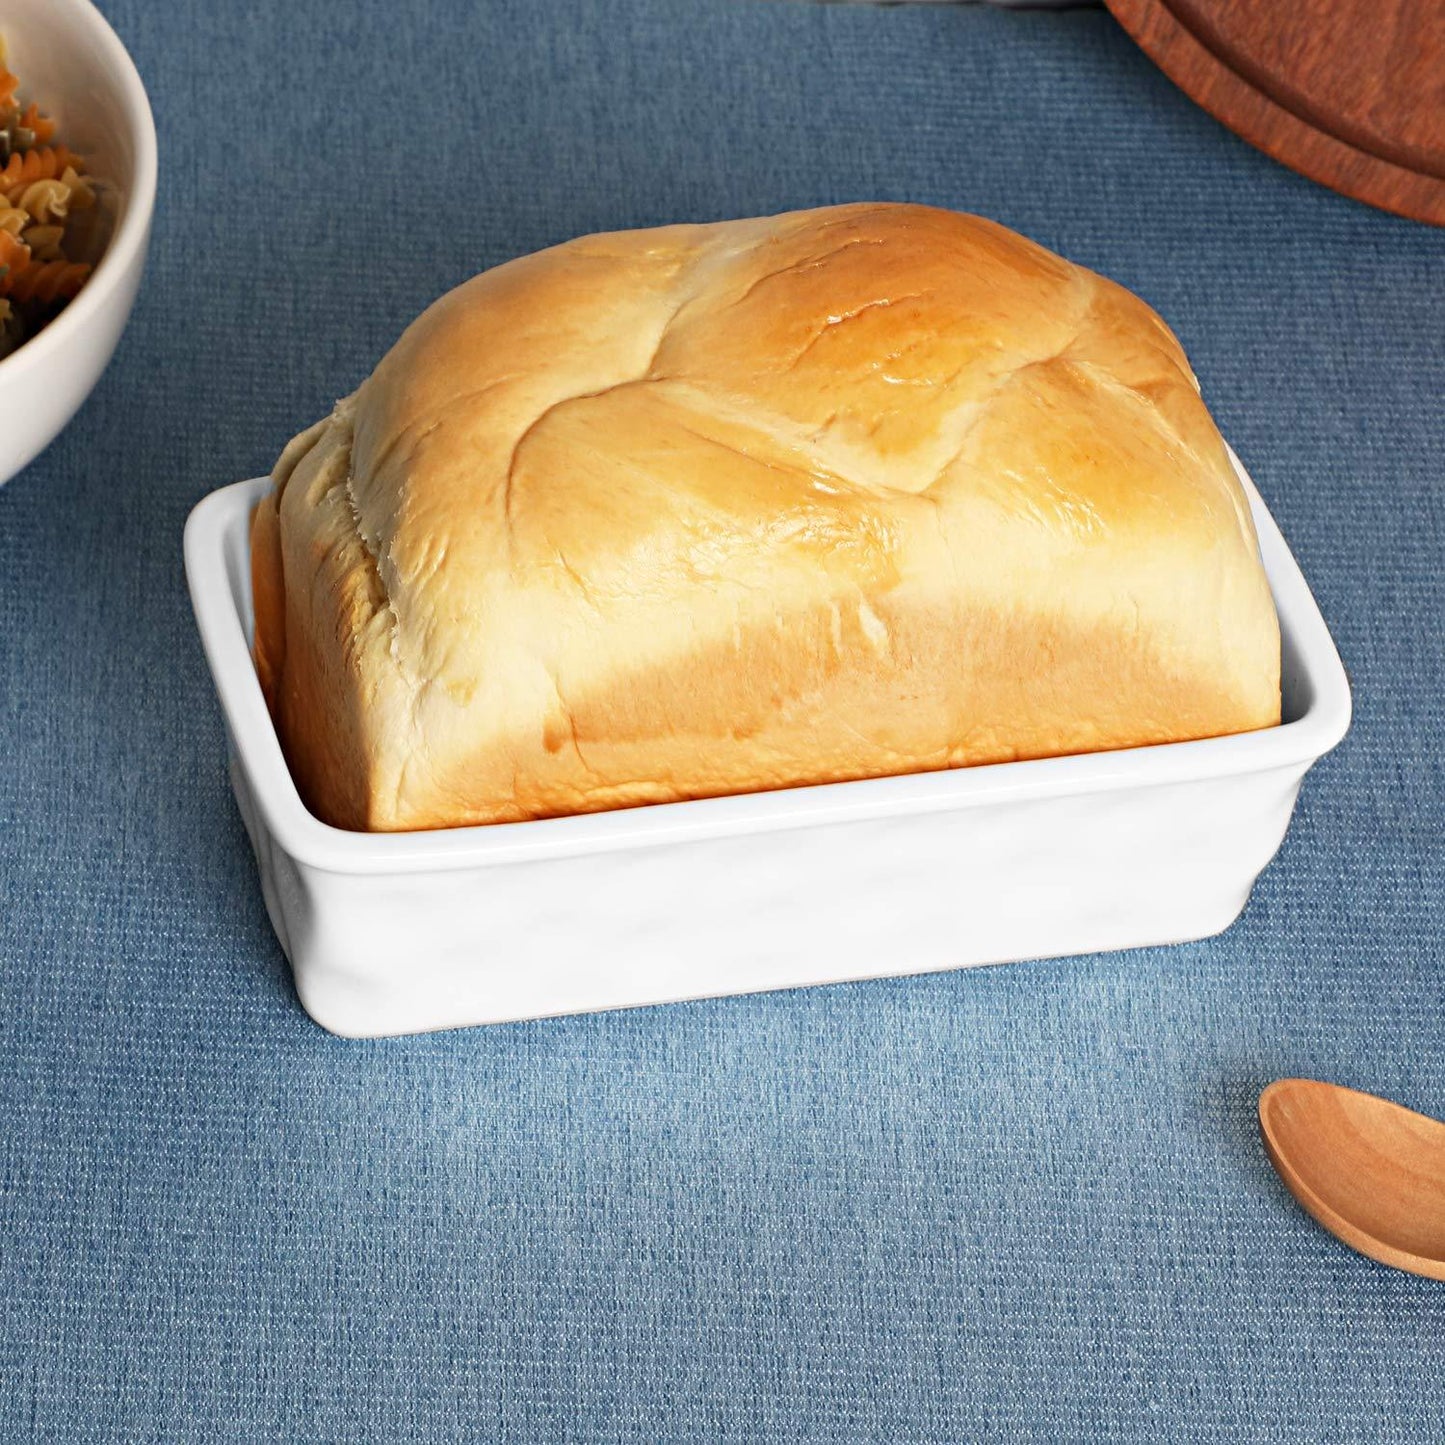 HAOTOP Ceramics Nonstick Baking Bread Loaf Pan, 8.5 x 4.6 Inch (White) - CookCave